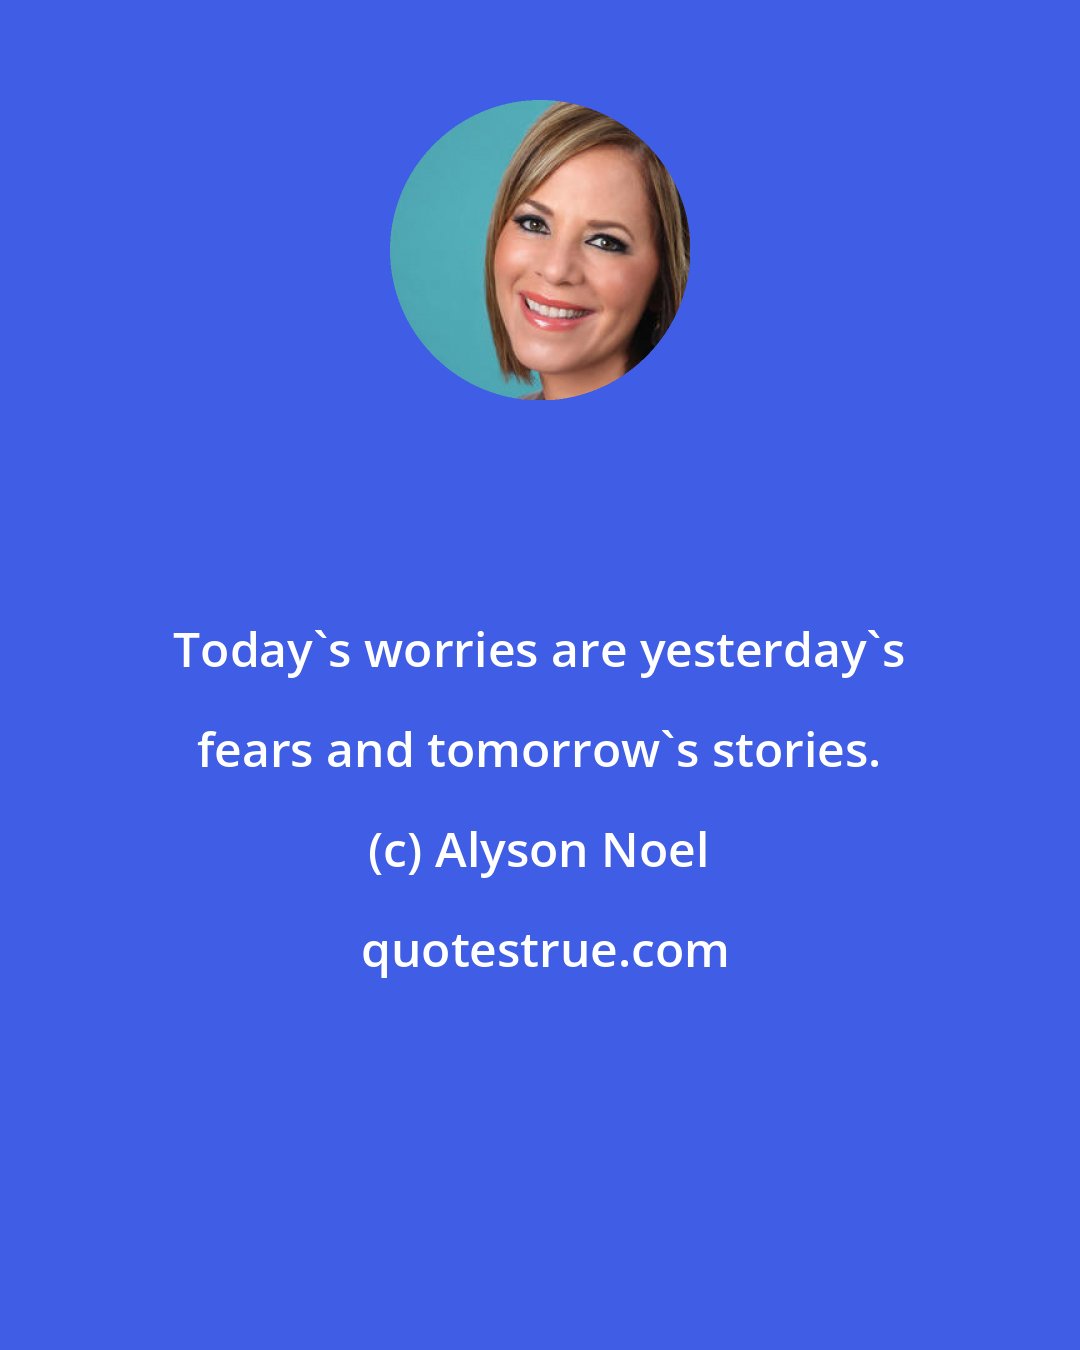 Alyson Noel: Today's worries are yesterday's fears and tomorrow's stories.